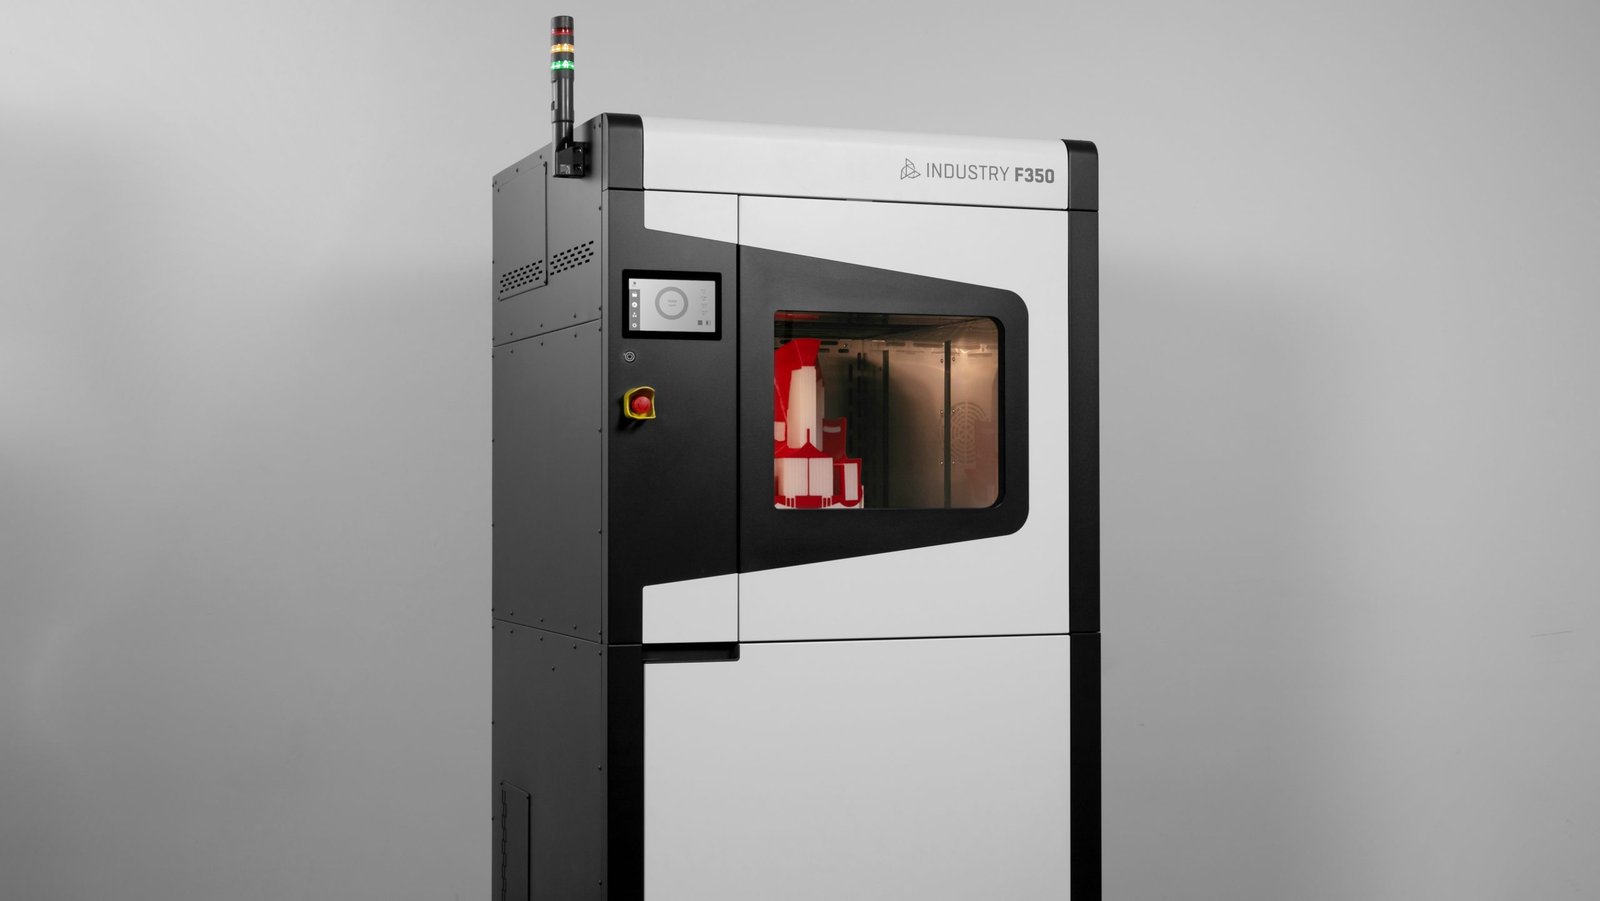 3DGence launches the INDUSTRY F350 high-temperature 3D printer - technical data and prices